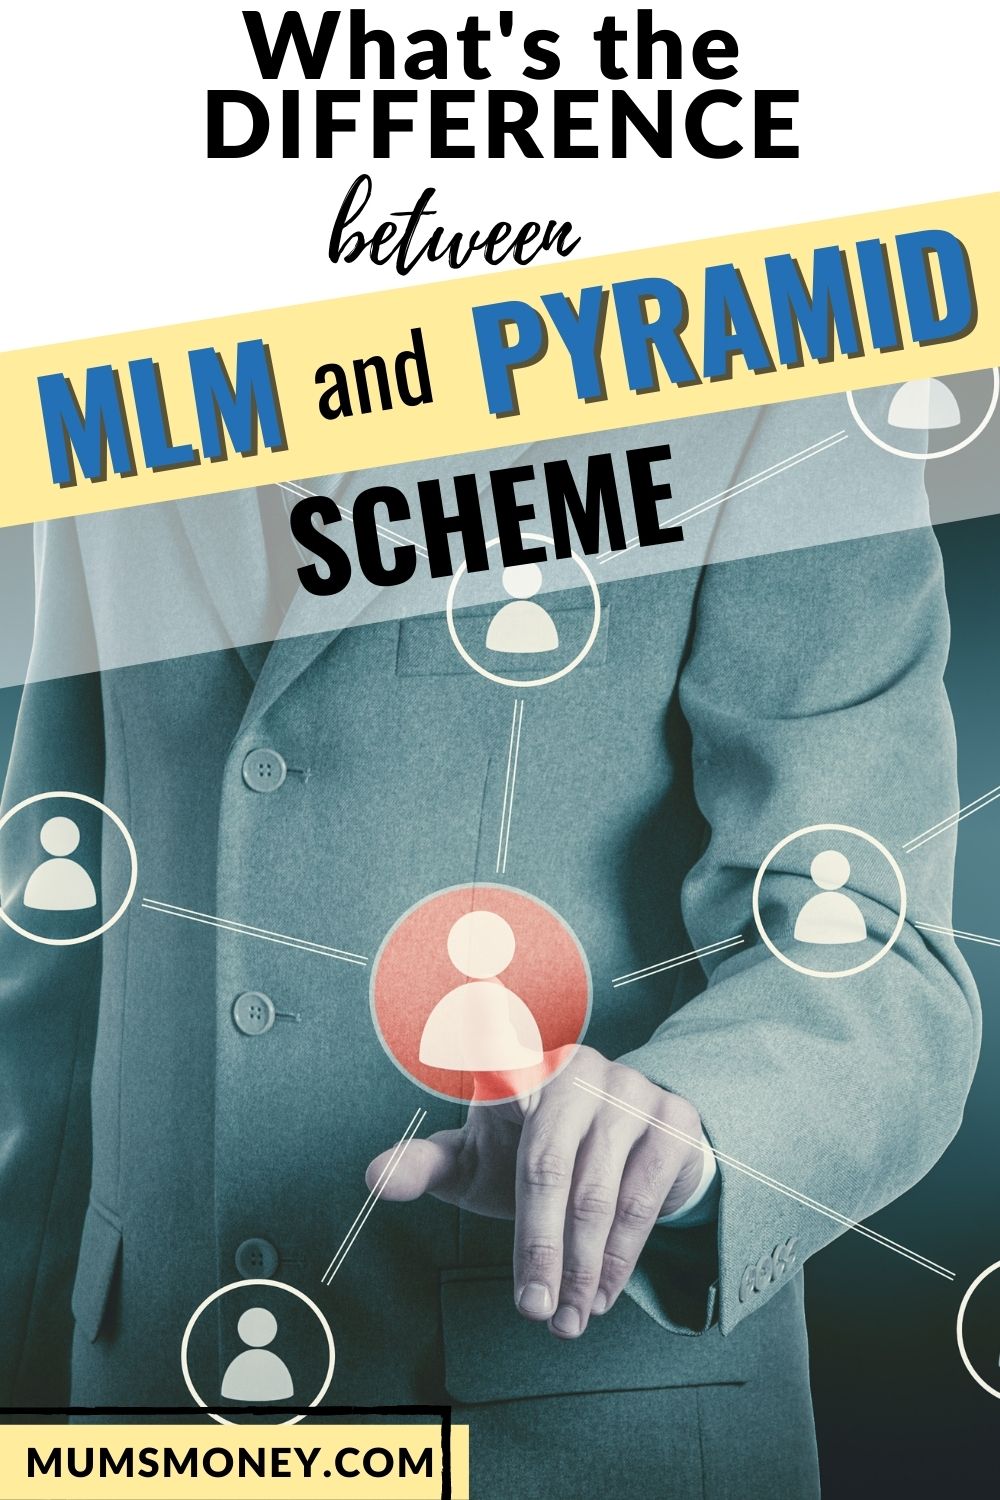 Image of a man at the background with text overlays that reads What's the Difference Between MLM and Pyramid Scheme